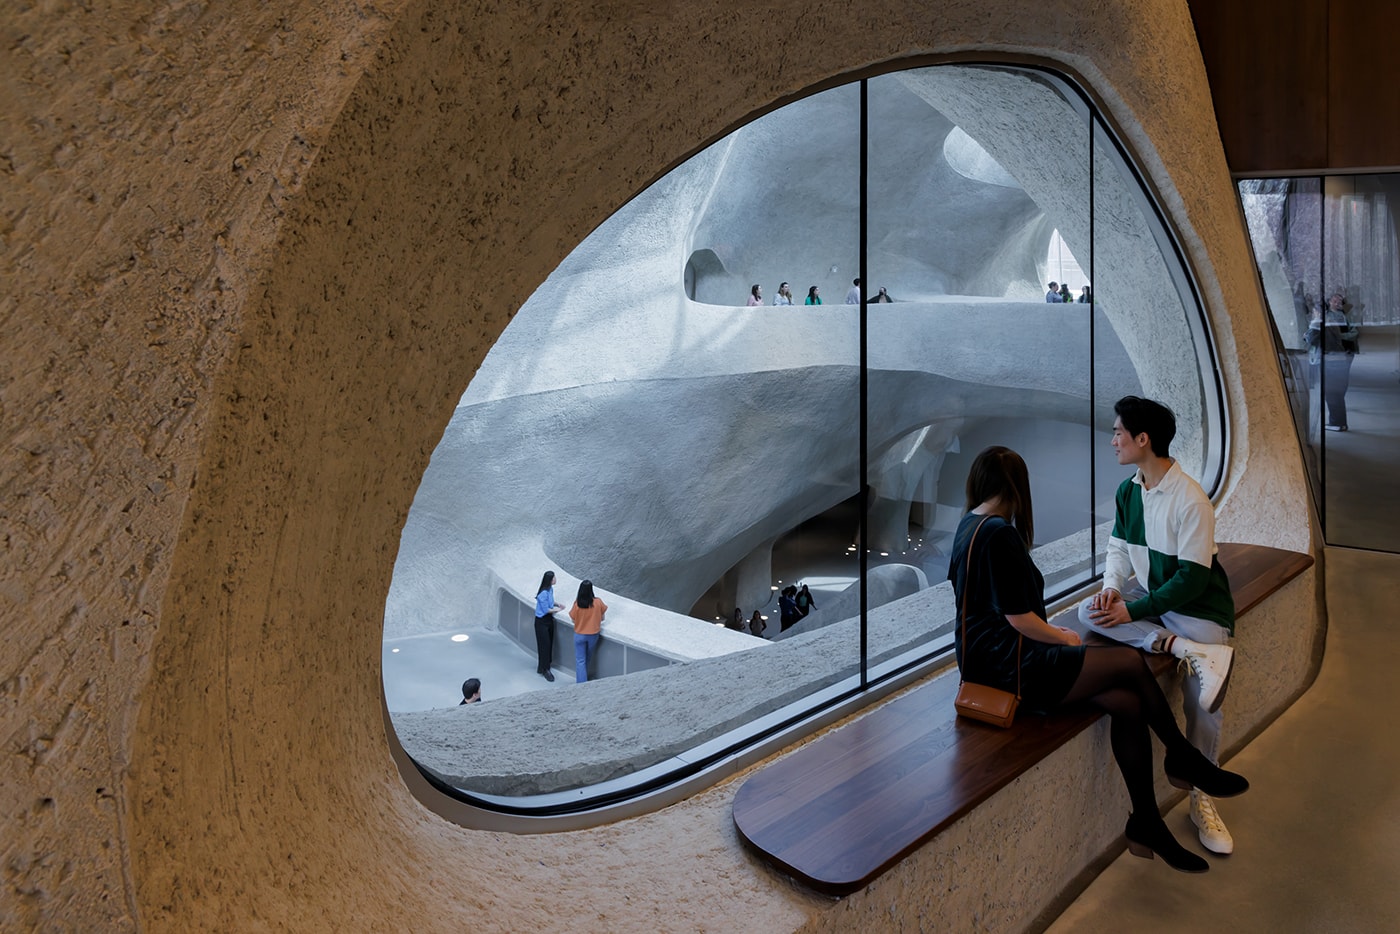 Studio Gang Creates Concrete Caverns for The Gilder Center in NYC